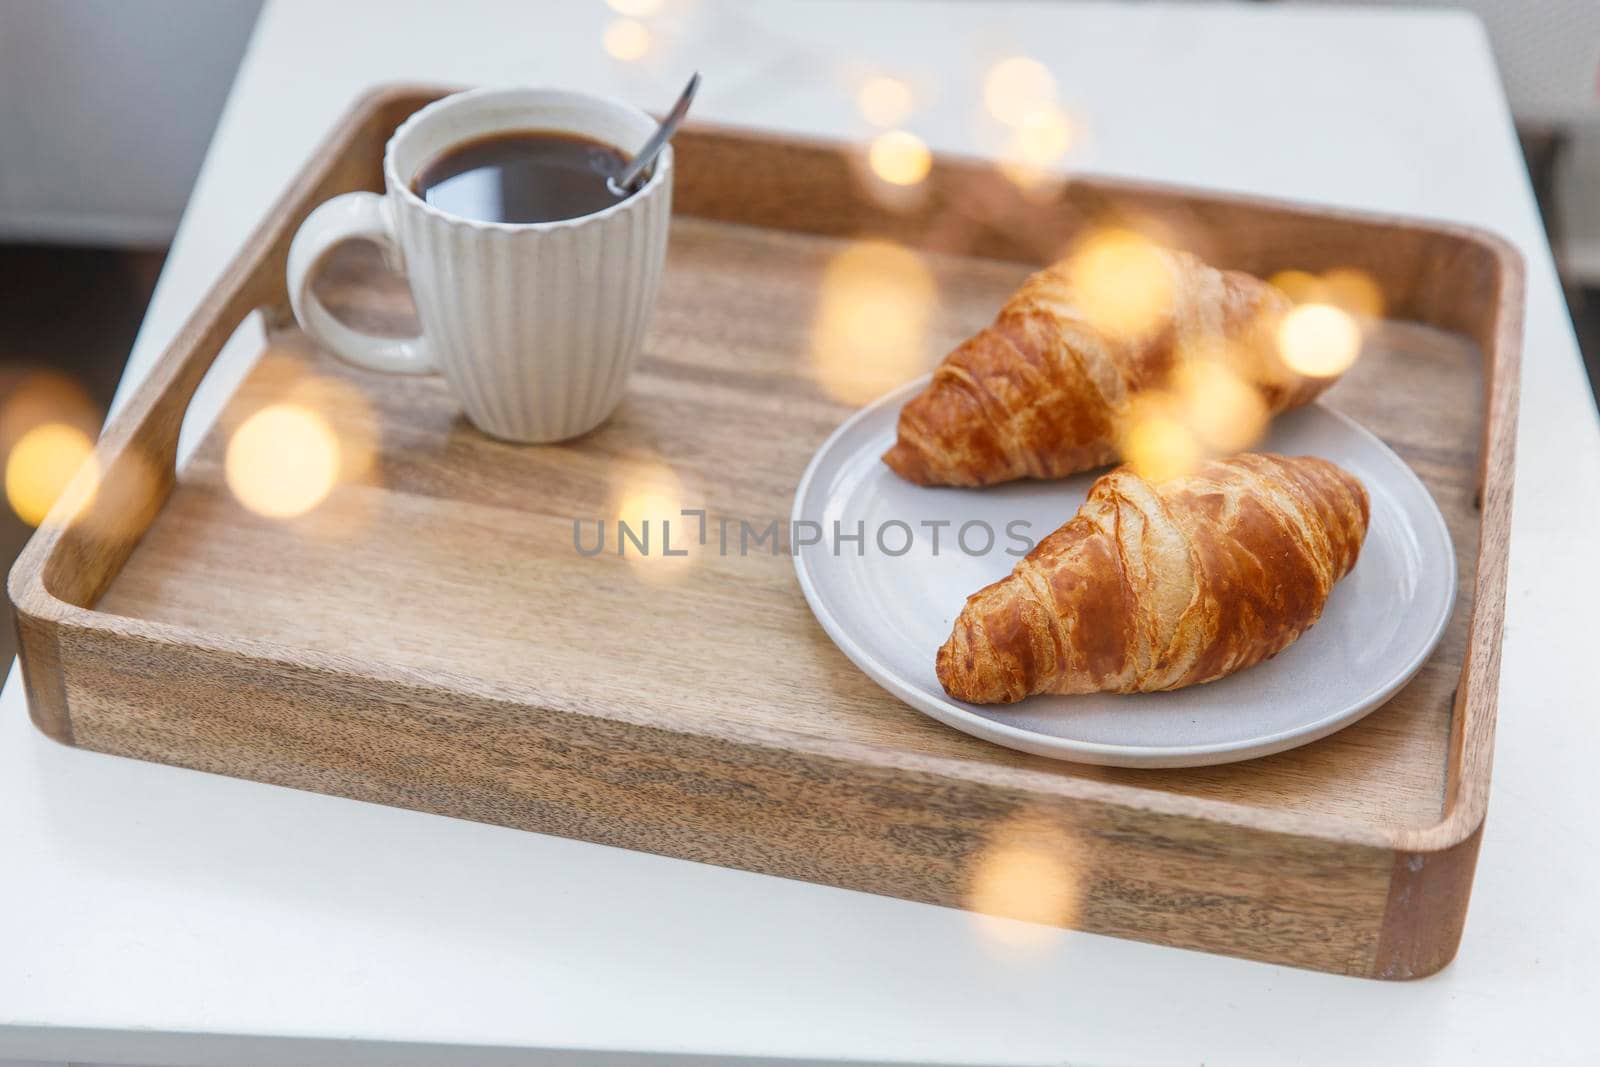 Freshly baked croissant on a gray round plate, white cup with coffee and garland on a tray on the table